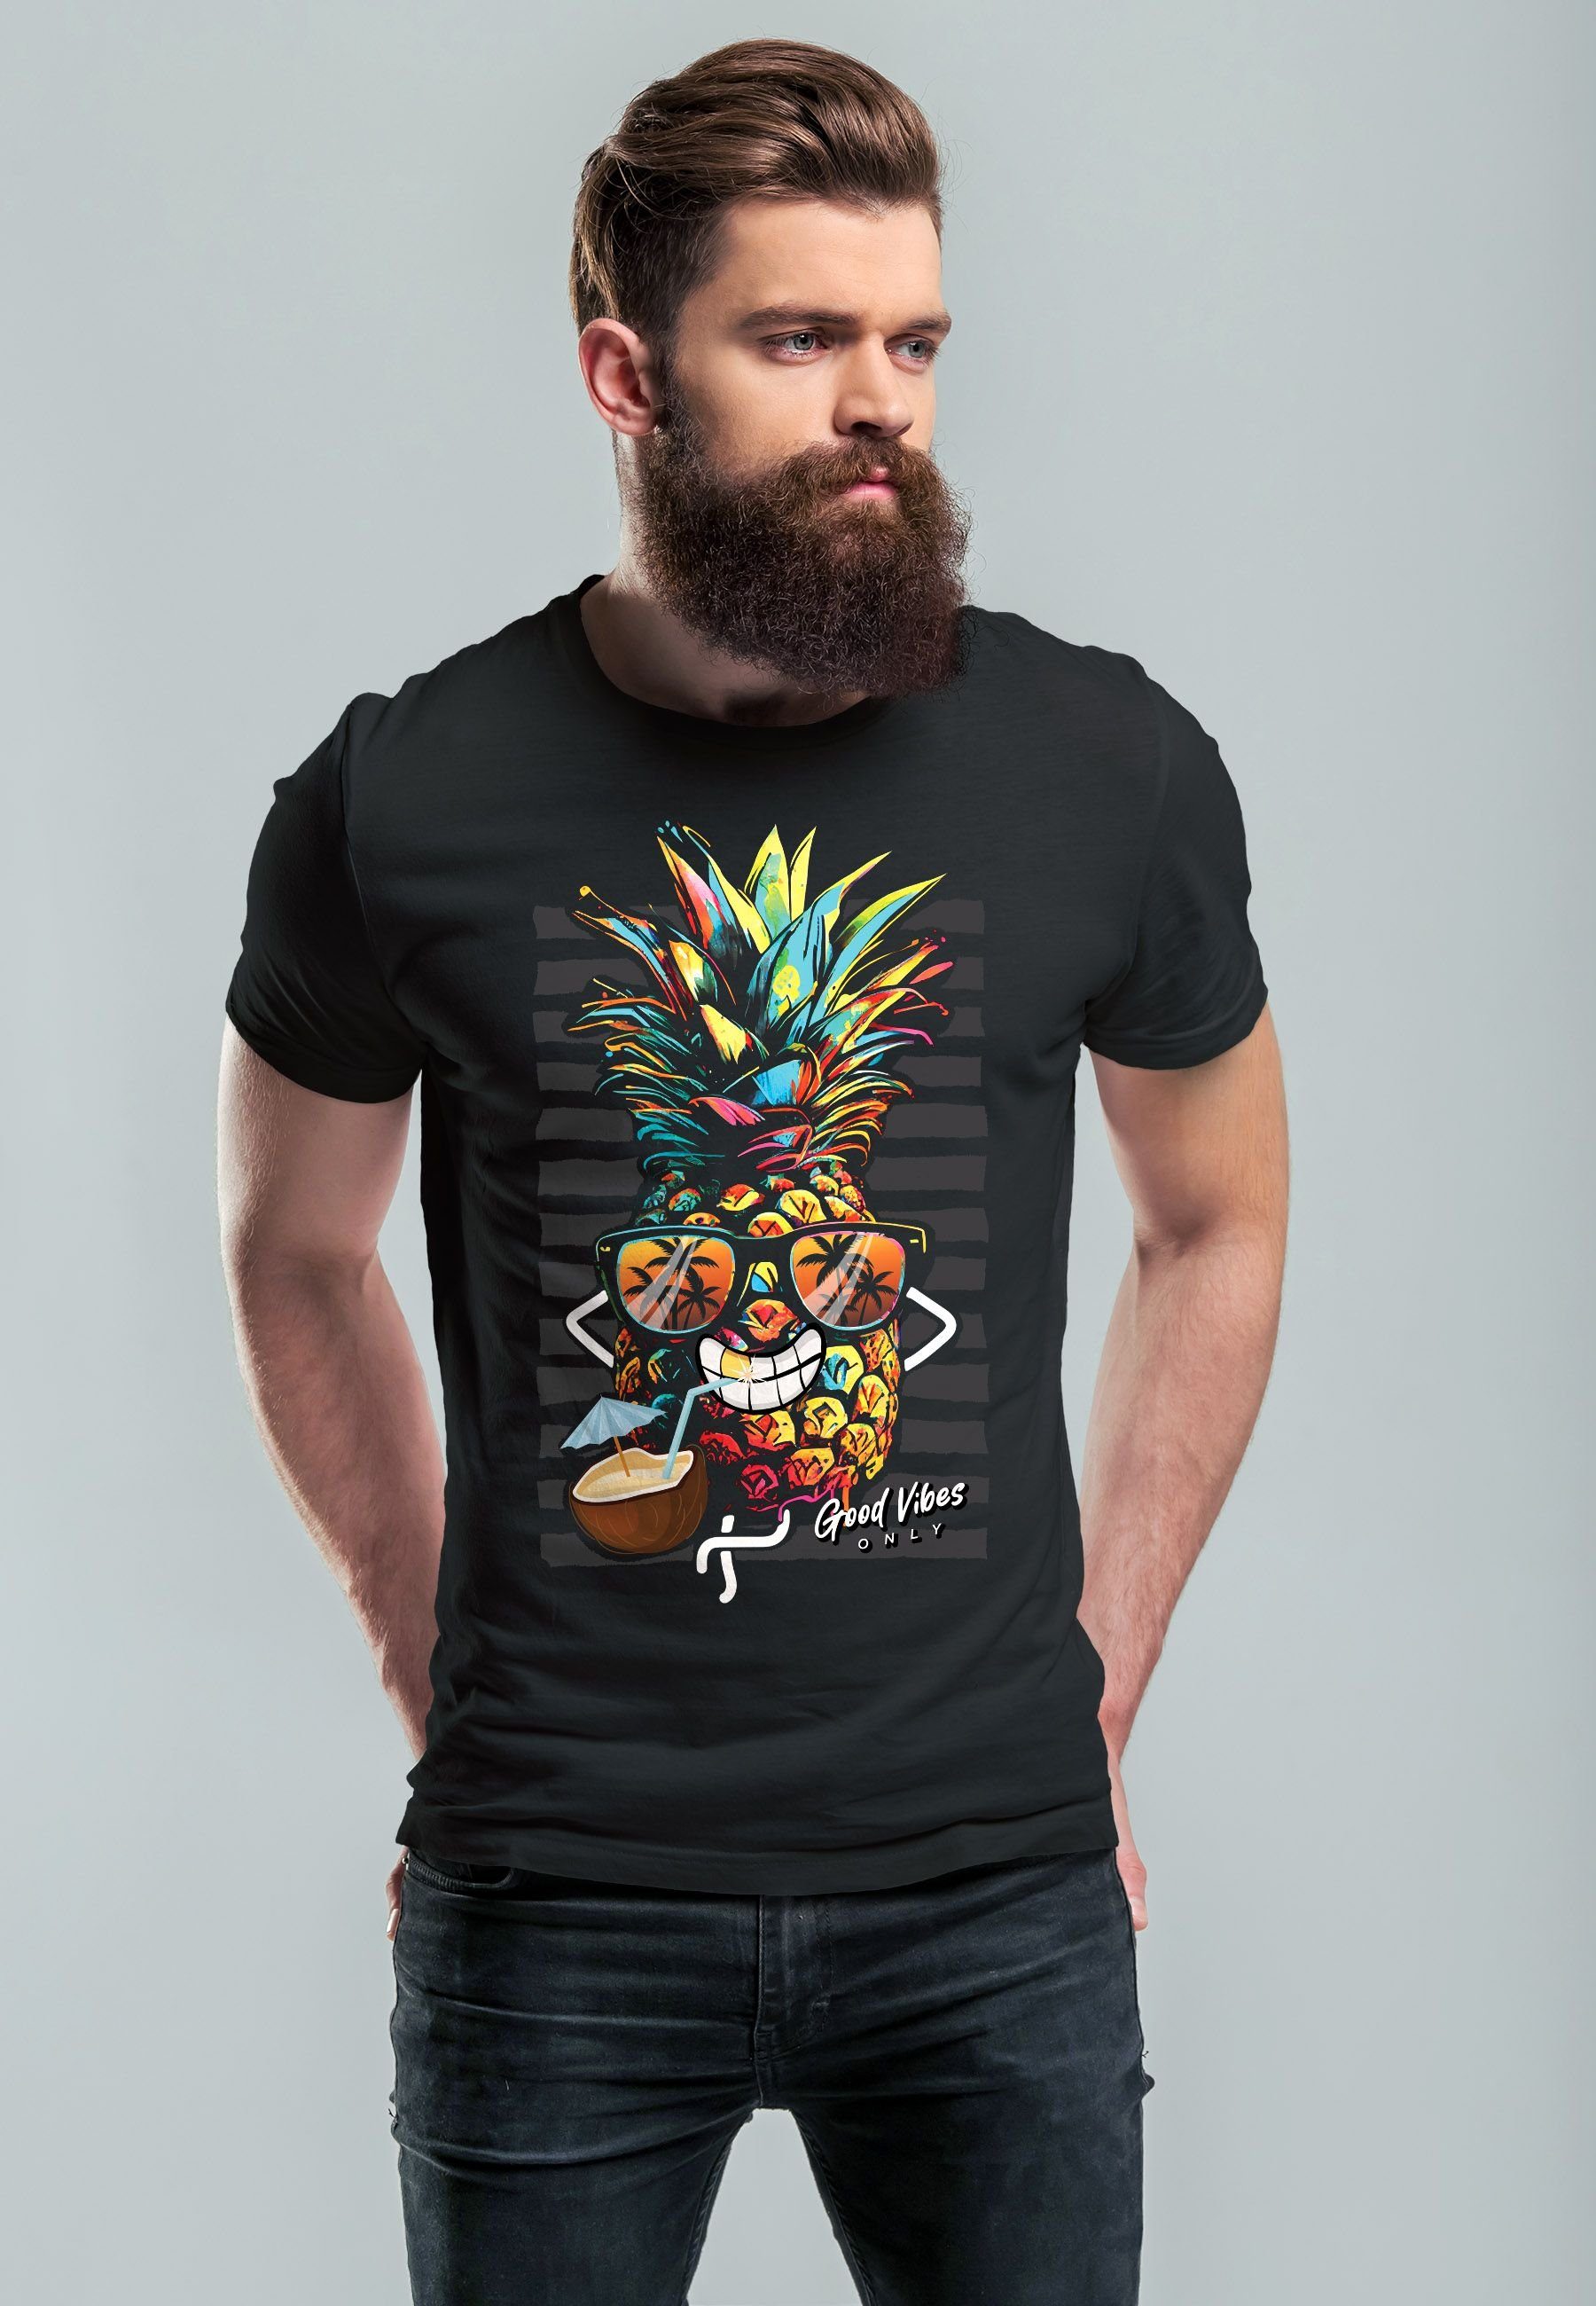 Fashion Vibes Sonne mit Print-Shirt Ananas Neverless Herren Party Cocktail T-Shirt Good Sommer Print S